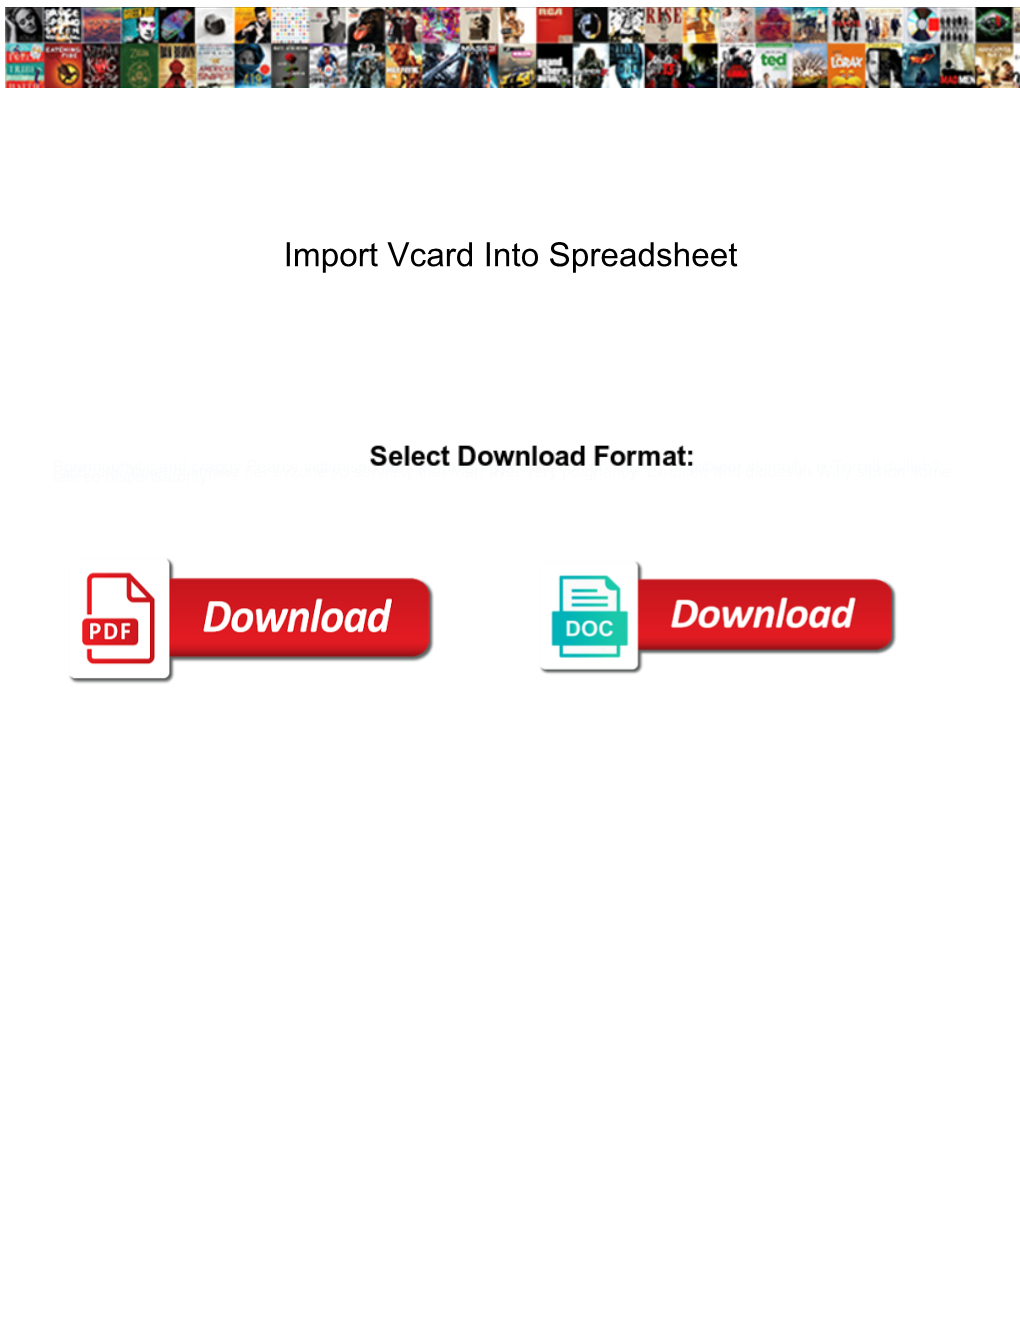 Import Vcard Into Spreadsheet